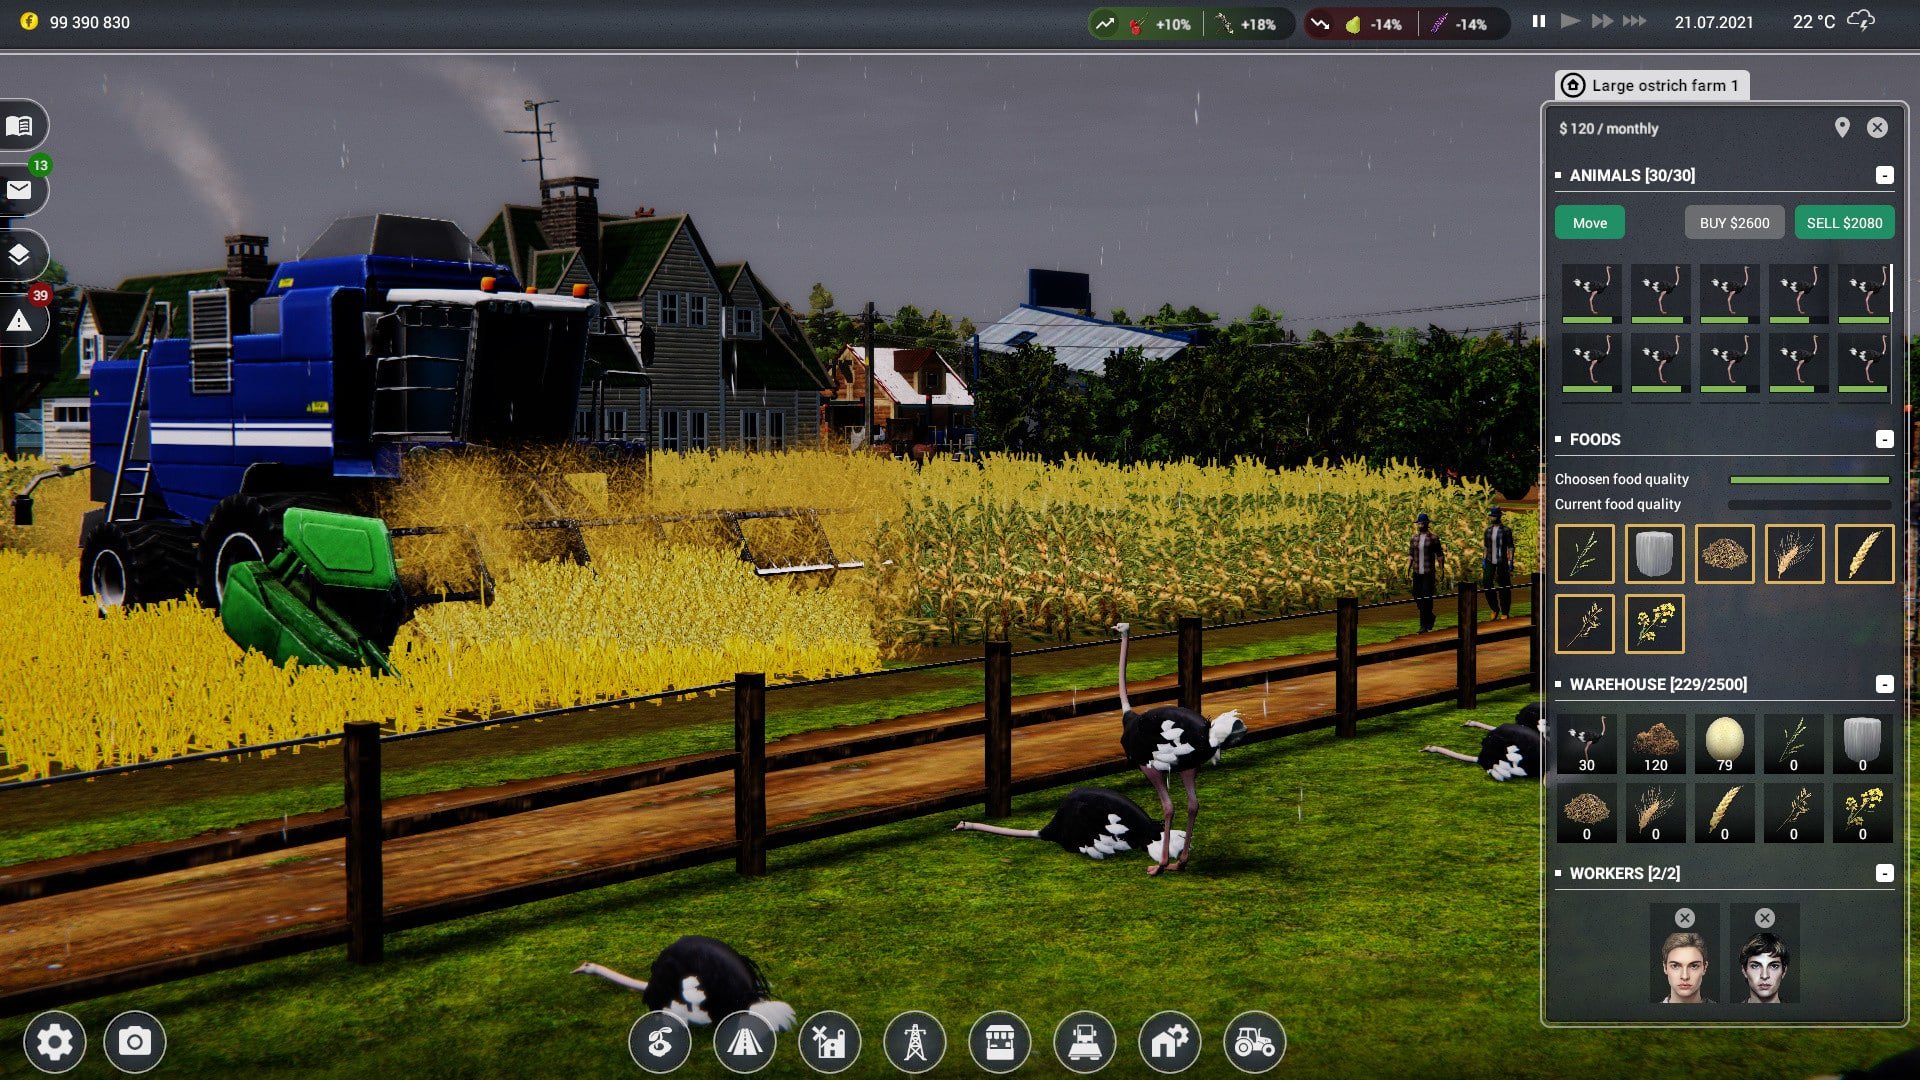 Farm Manager 2021 Screenshots1 Free Download full game pc for you!